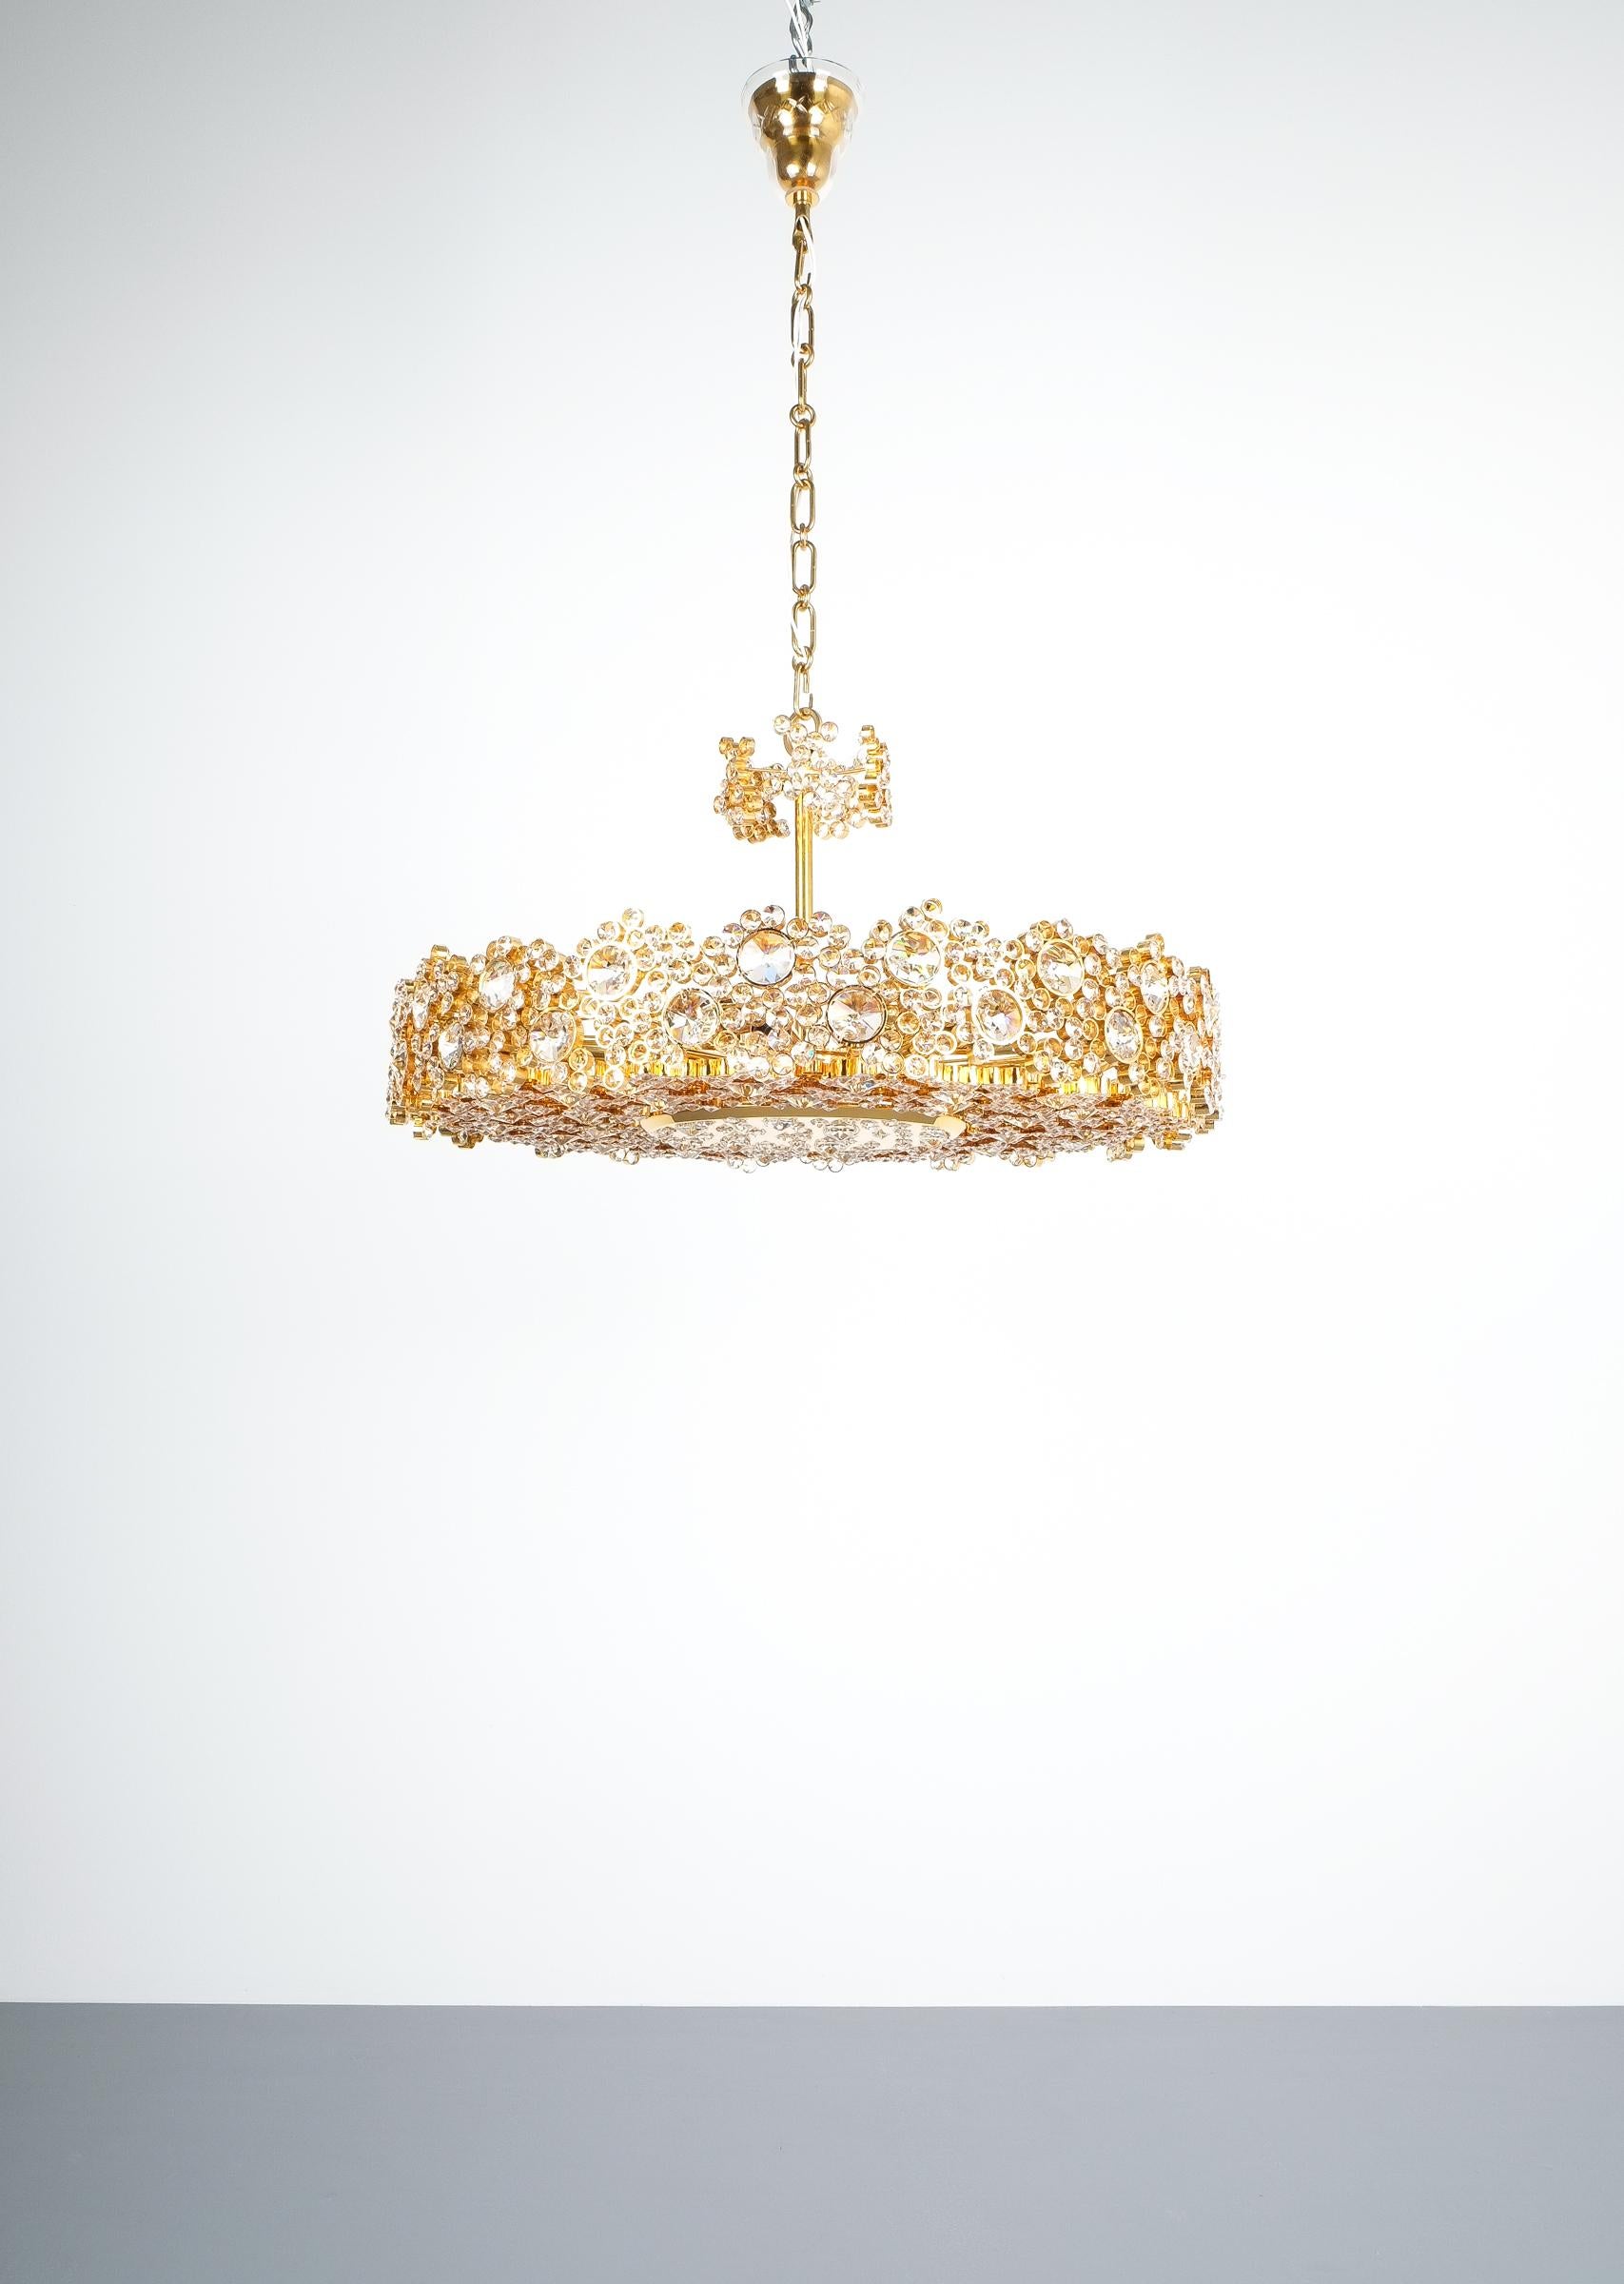 Palwa Crystal Glass Gold-Plated Brass Chandelier Refurbished Lamp 6